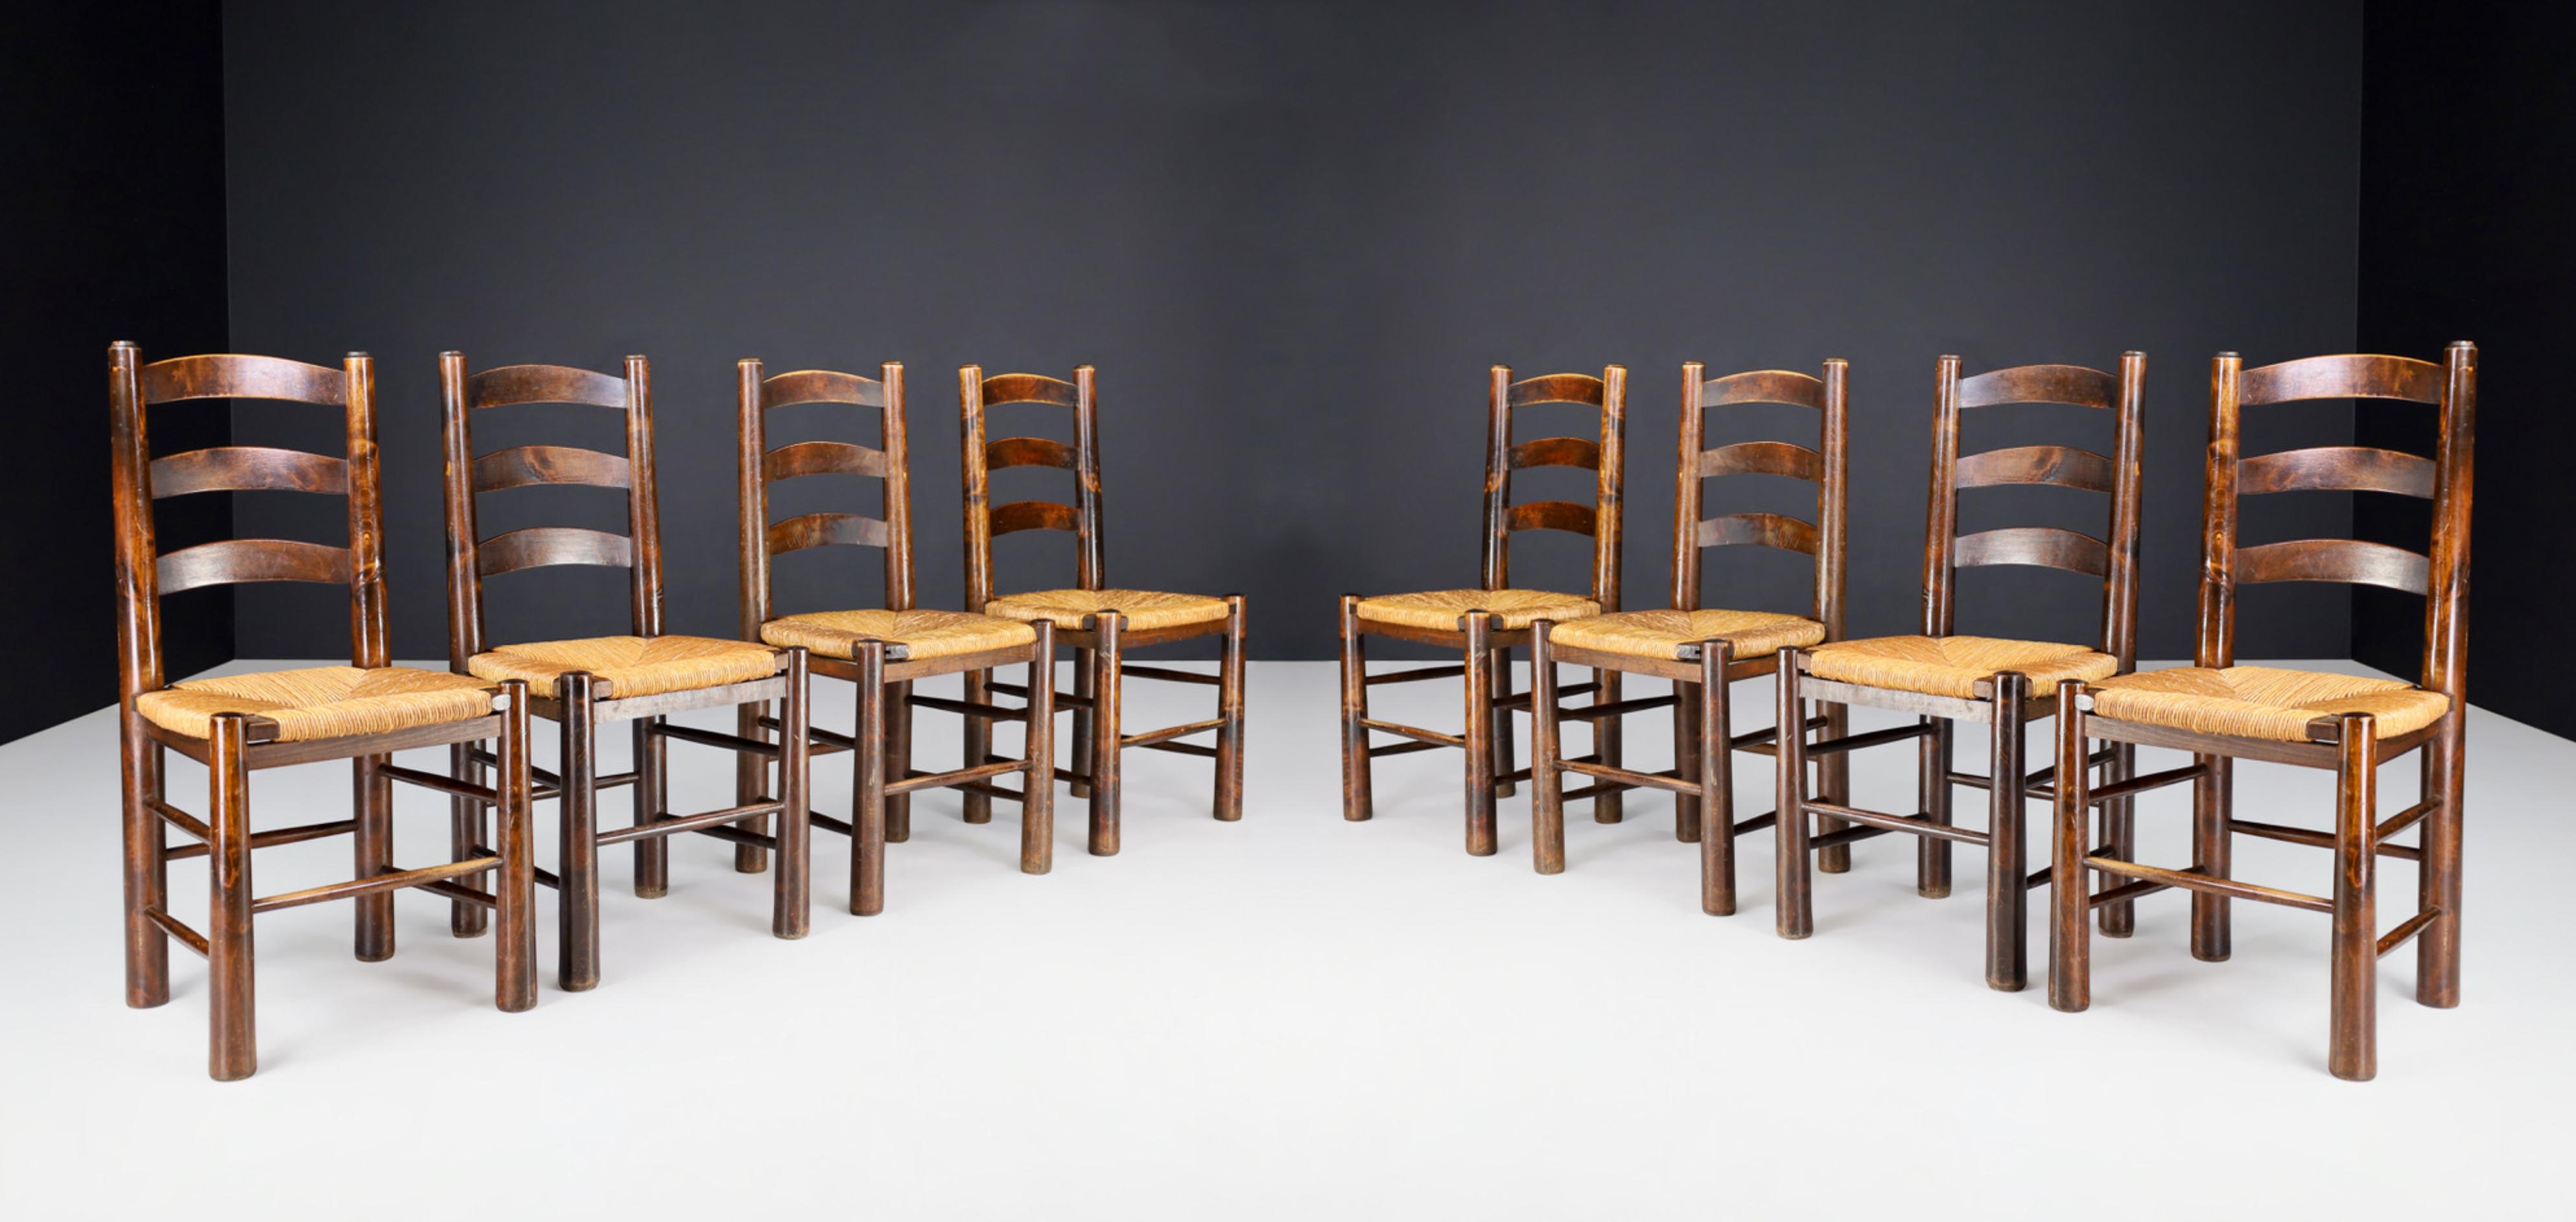 Georges Robert dining chairs in patinated oak and rush, France 1950s

Set of 8 Mountain or chalet chairs made by Meubles Georges Robert french cabinetmaker in the 1950s. The structure is of solid oak with conical legs. The seat is woven rush,